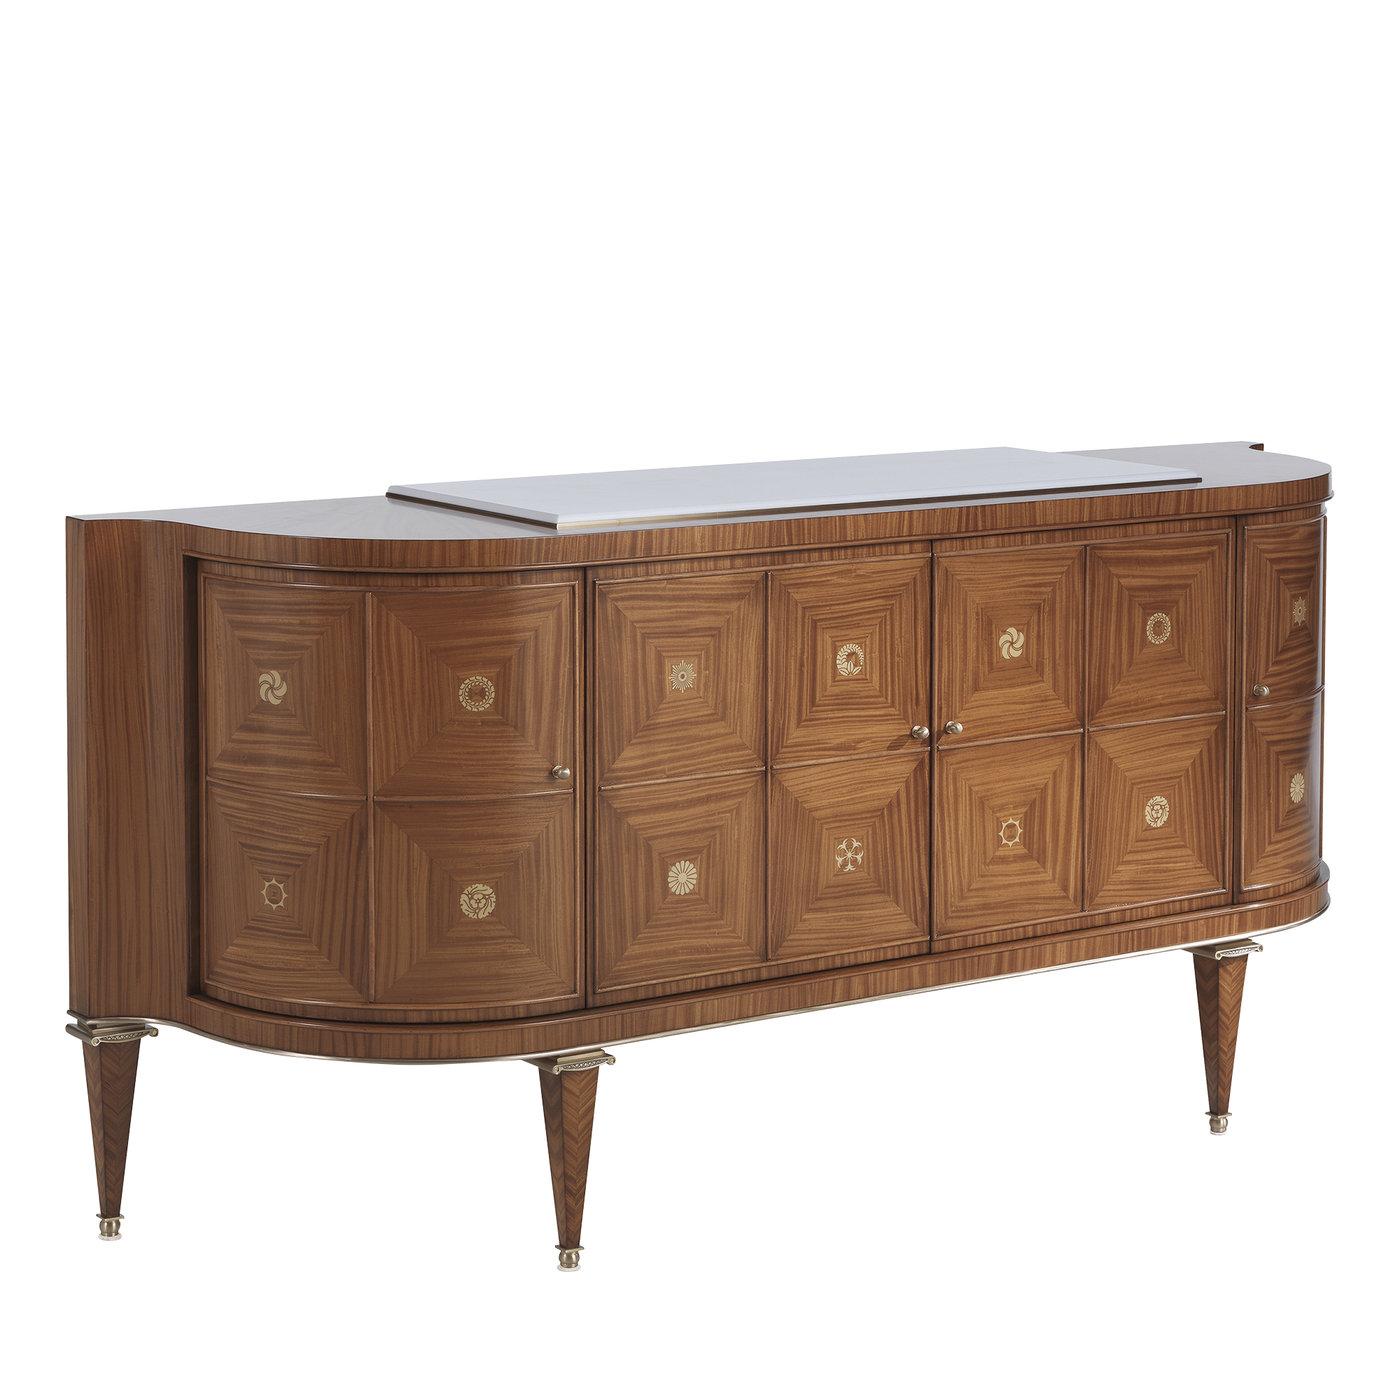 Clear lines and refined charm characterize this dramatic sideboard. The demi-lune silhouette is crafted of solid citronnier wood and features two central doors flanked by two lateral doors accented with round handles. The wood's natural